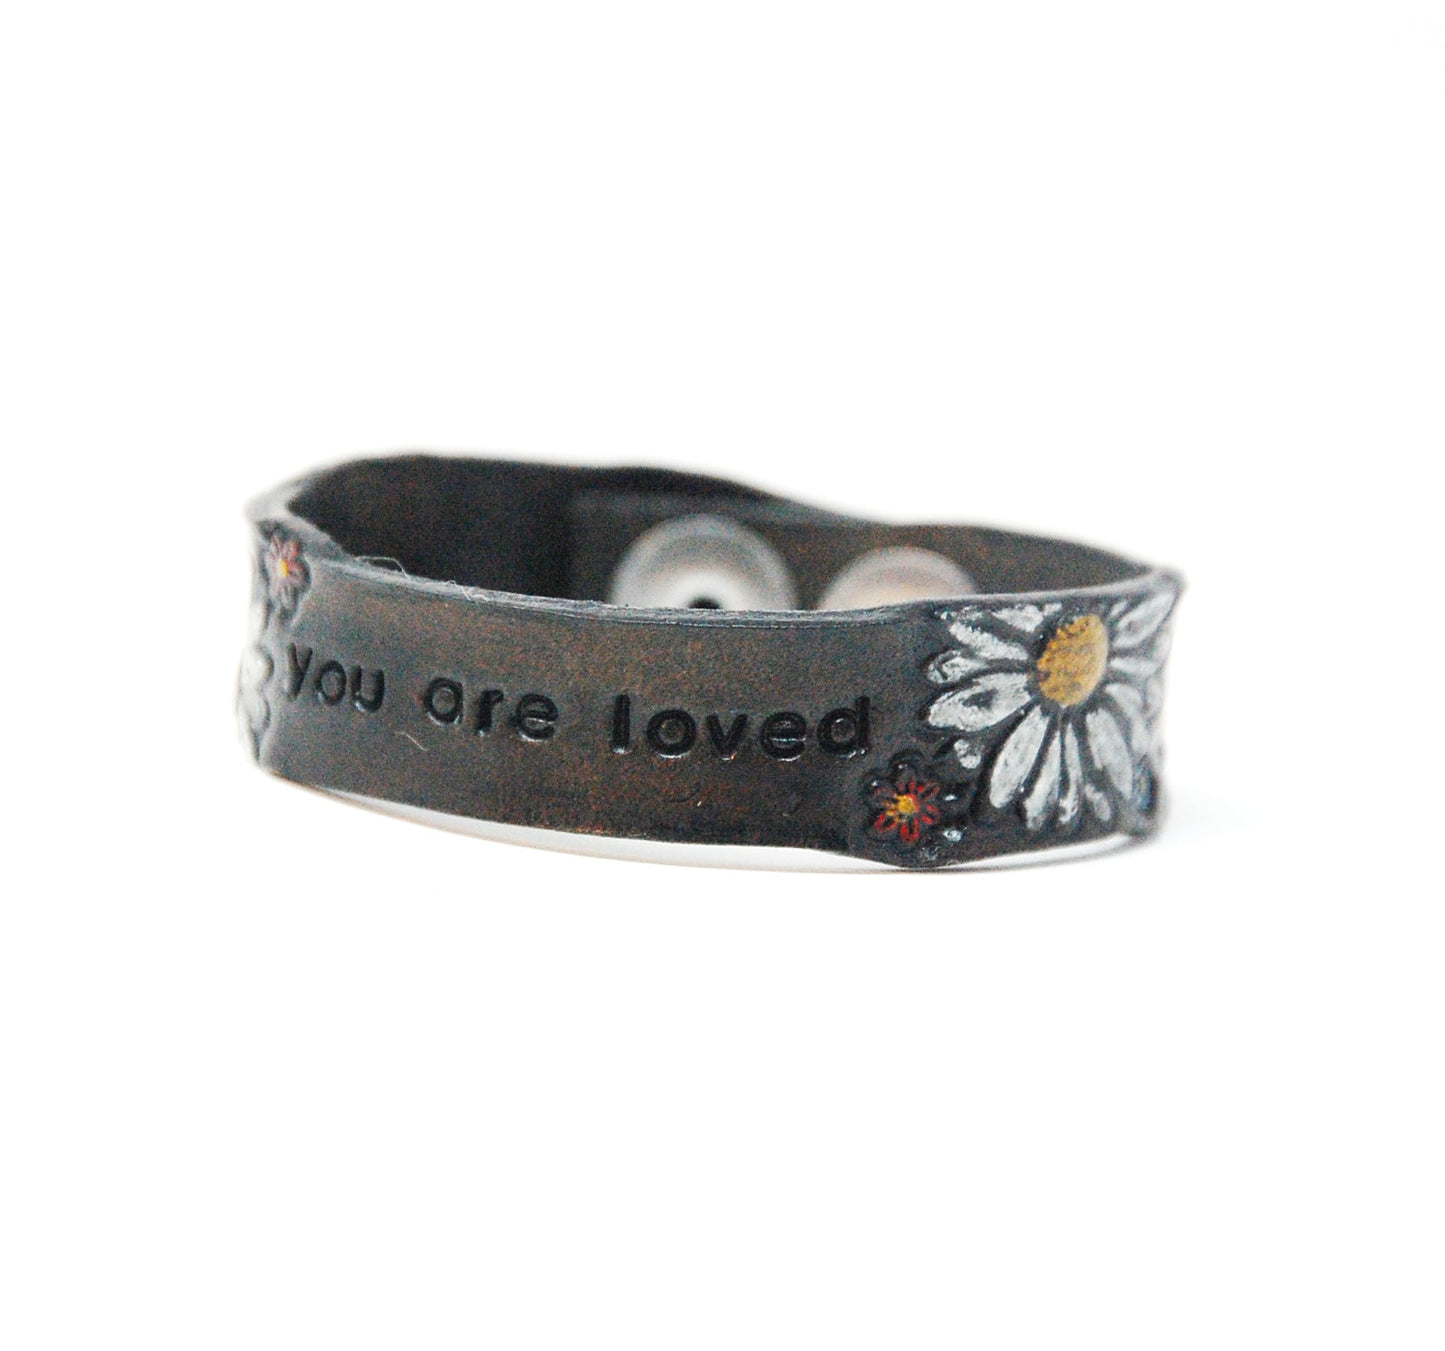 Stamped Word and Flower Handpainted Bracelets Smoke Black with Pink Roses